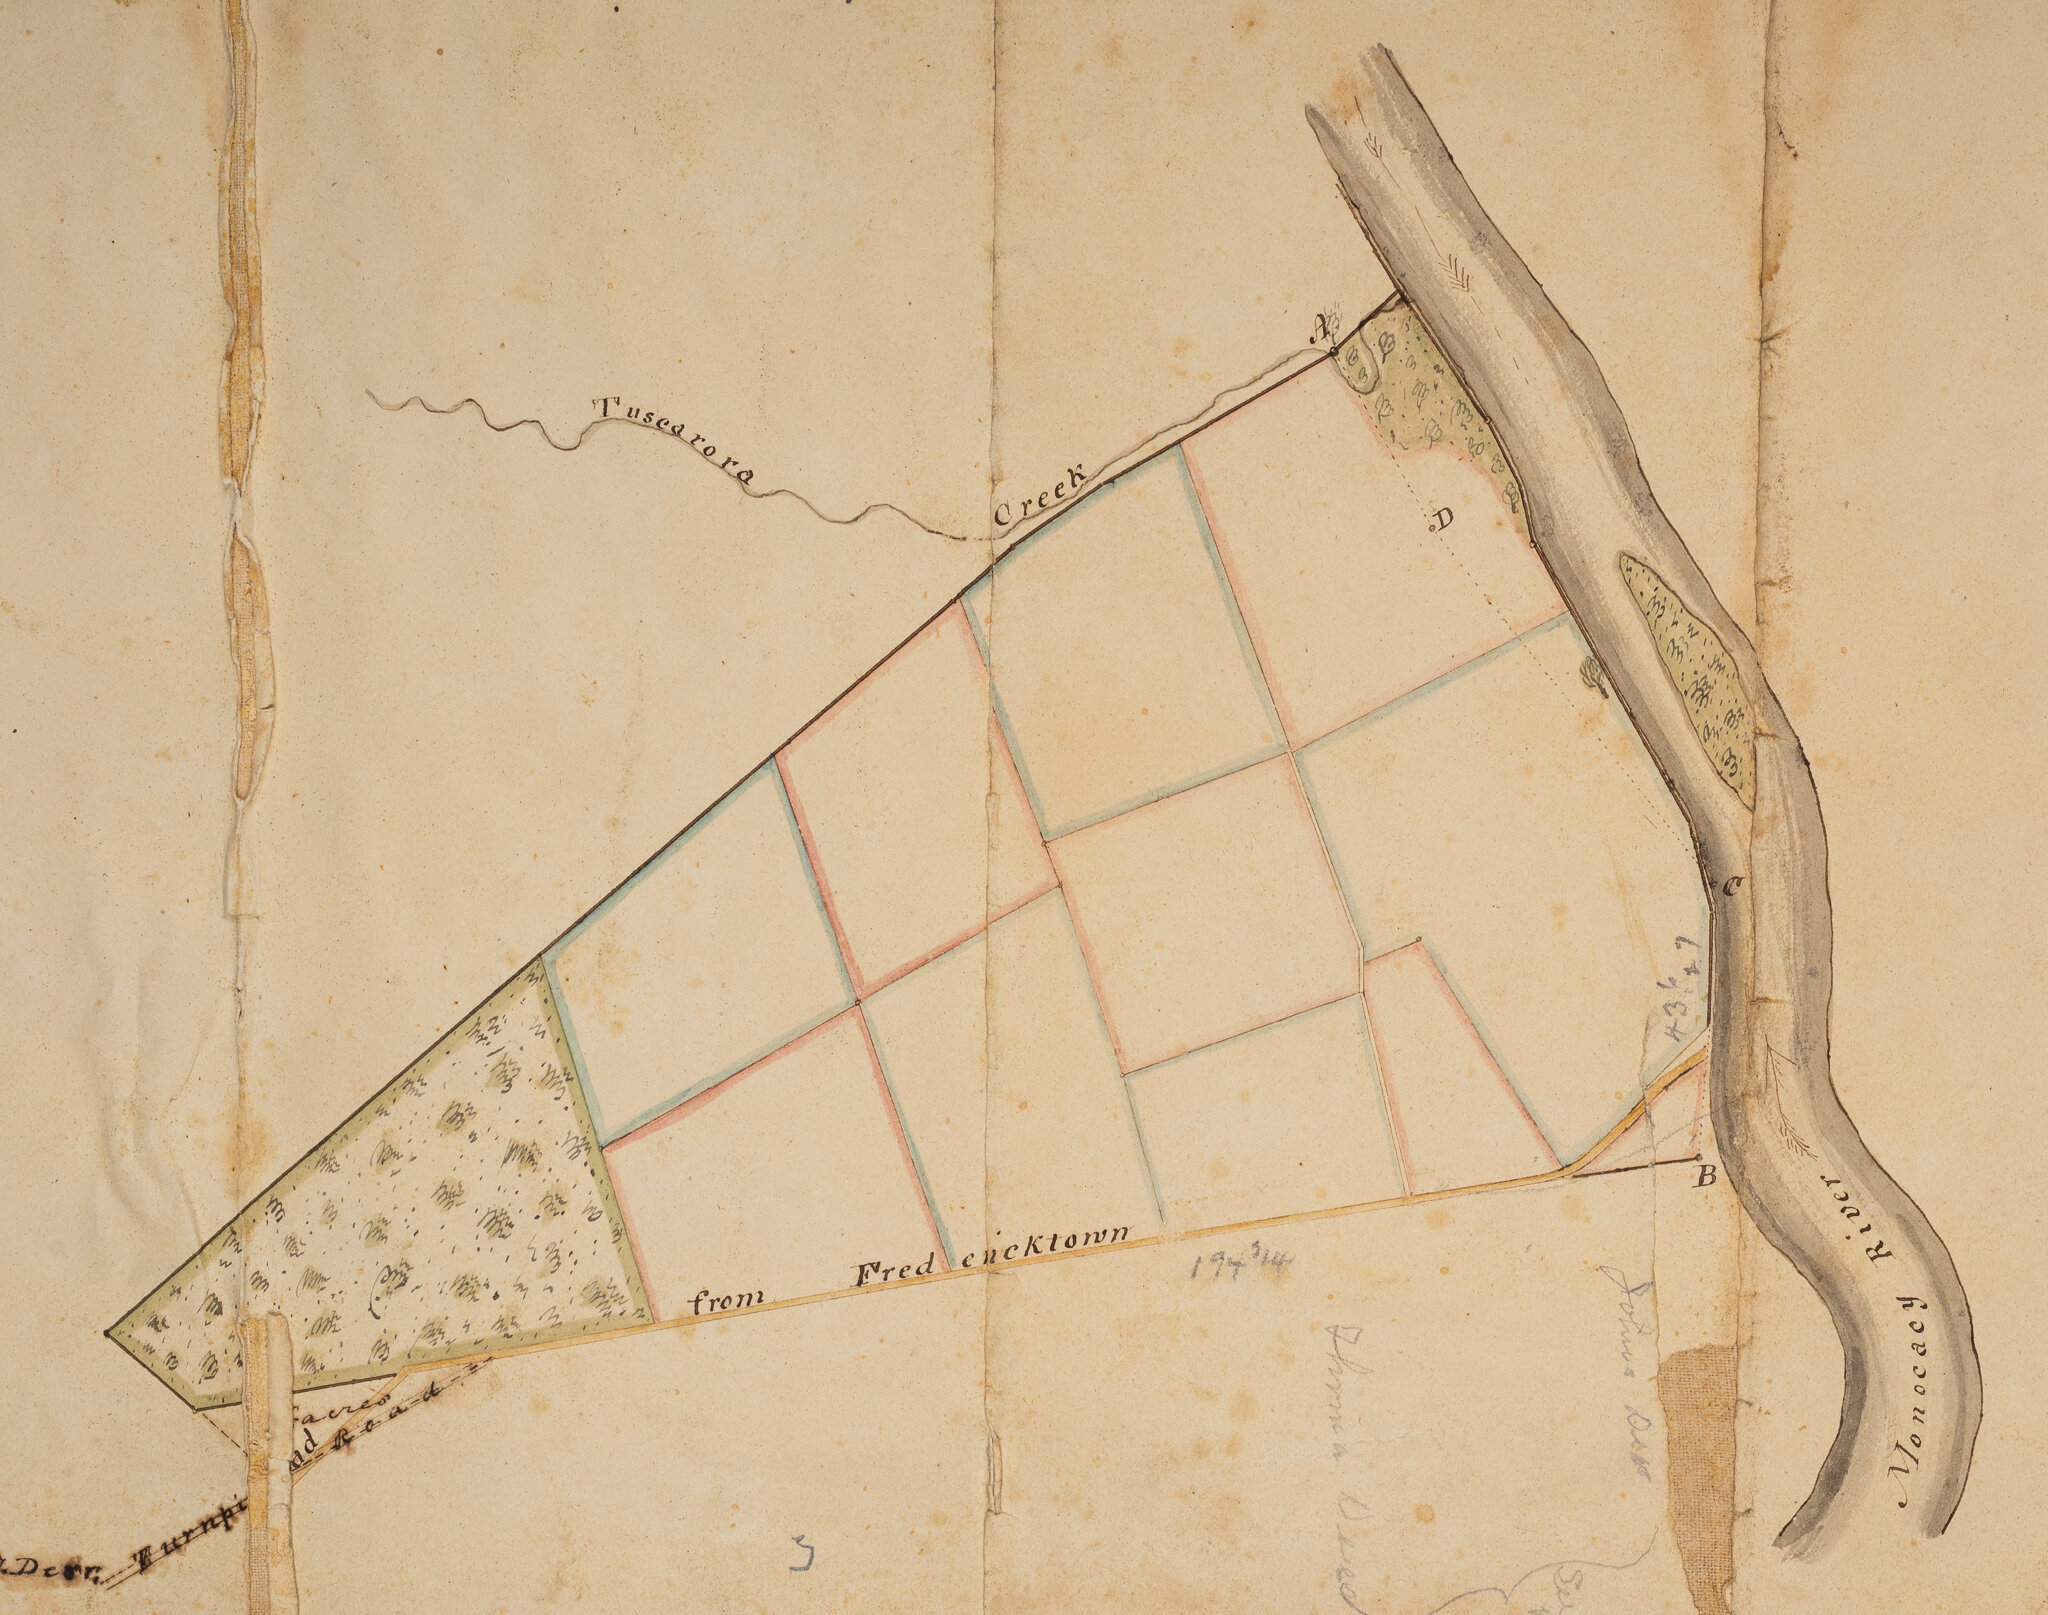  Map detail  Survey depicting portion of land called “ Bear’s Den”  along Liberty Road owned by John Derr  1834 